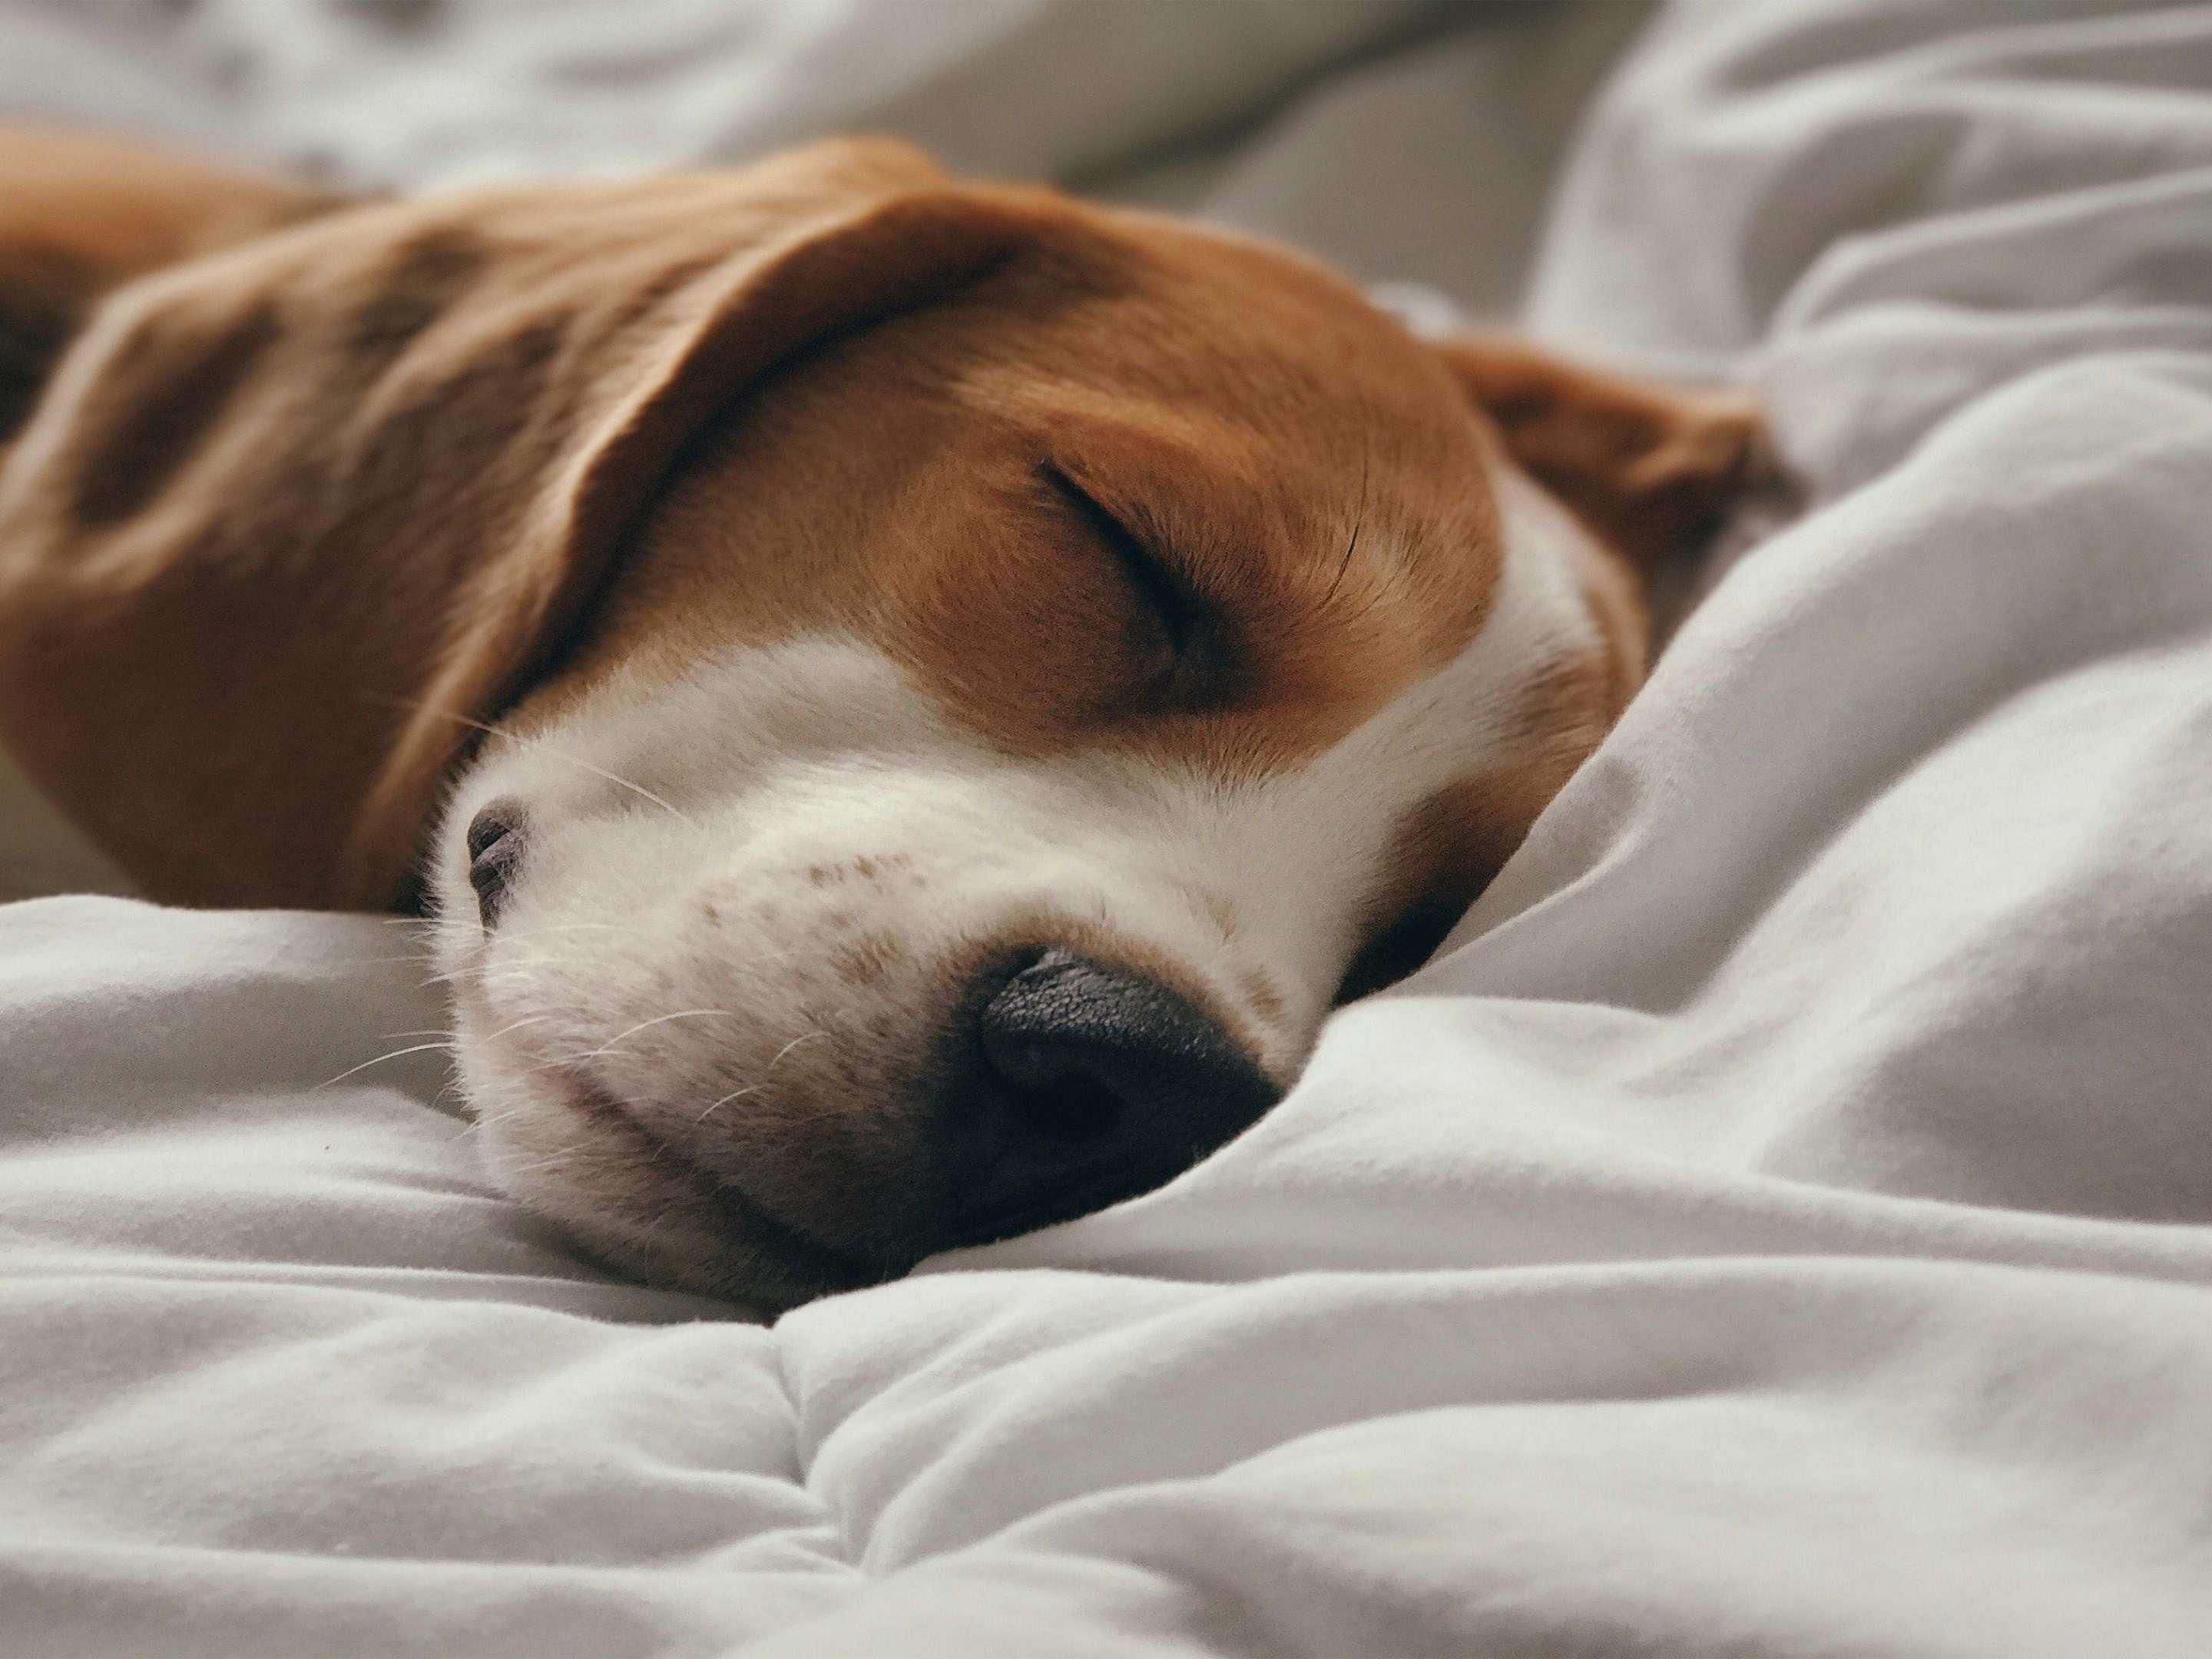 Pet-friendly stays for you and your four-legged companion and best friend. 
The pet deposit per stay is 65,000 AMD. Note that only dogs weighing 25 kilograms and below are permitted. Two dogs may be allowed in a guestroom provided that their combined weight does not exceed 40 kilograms.